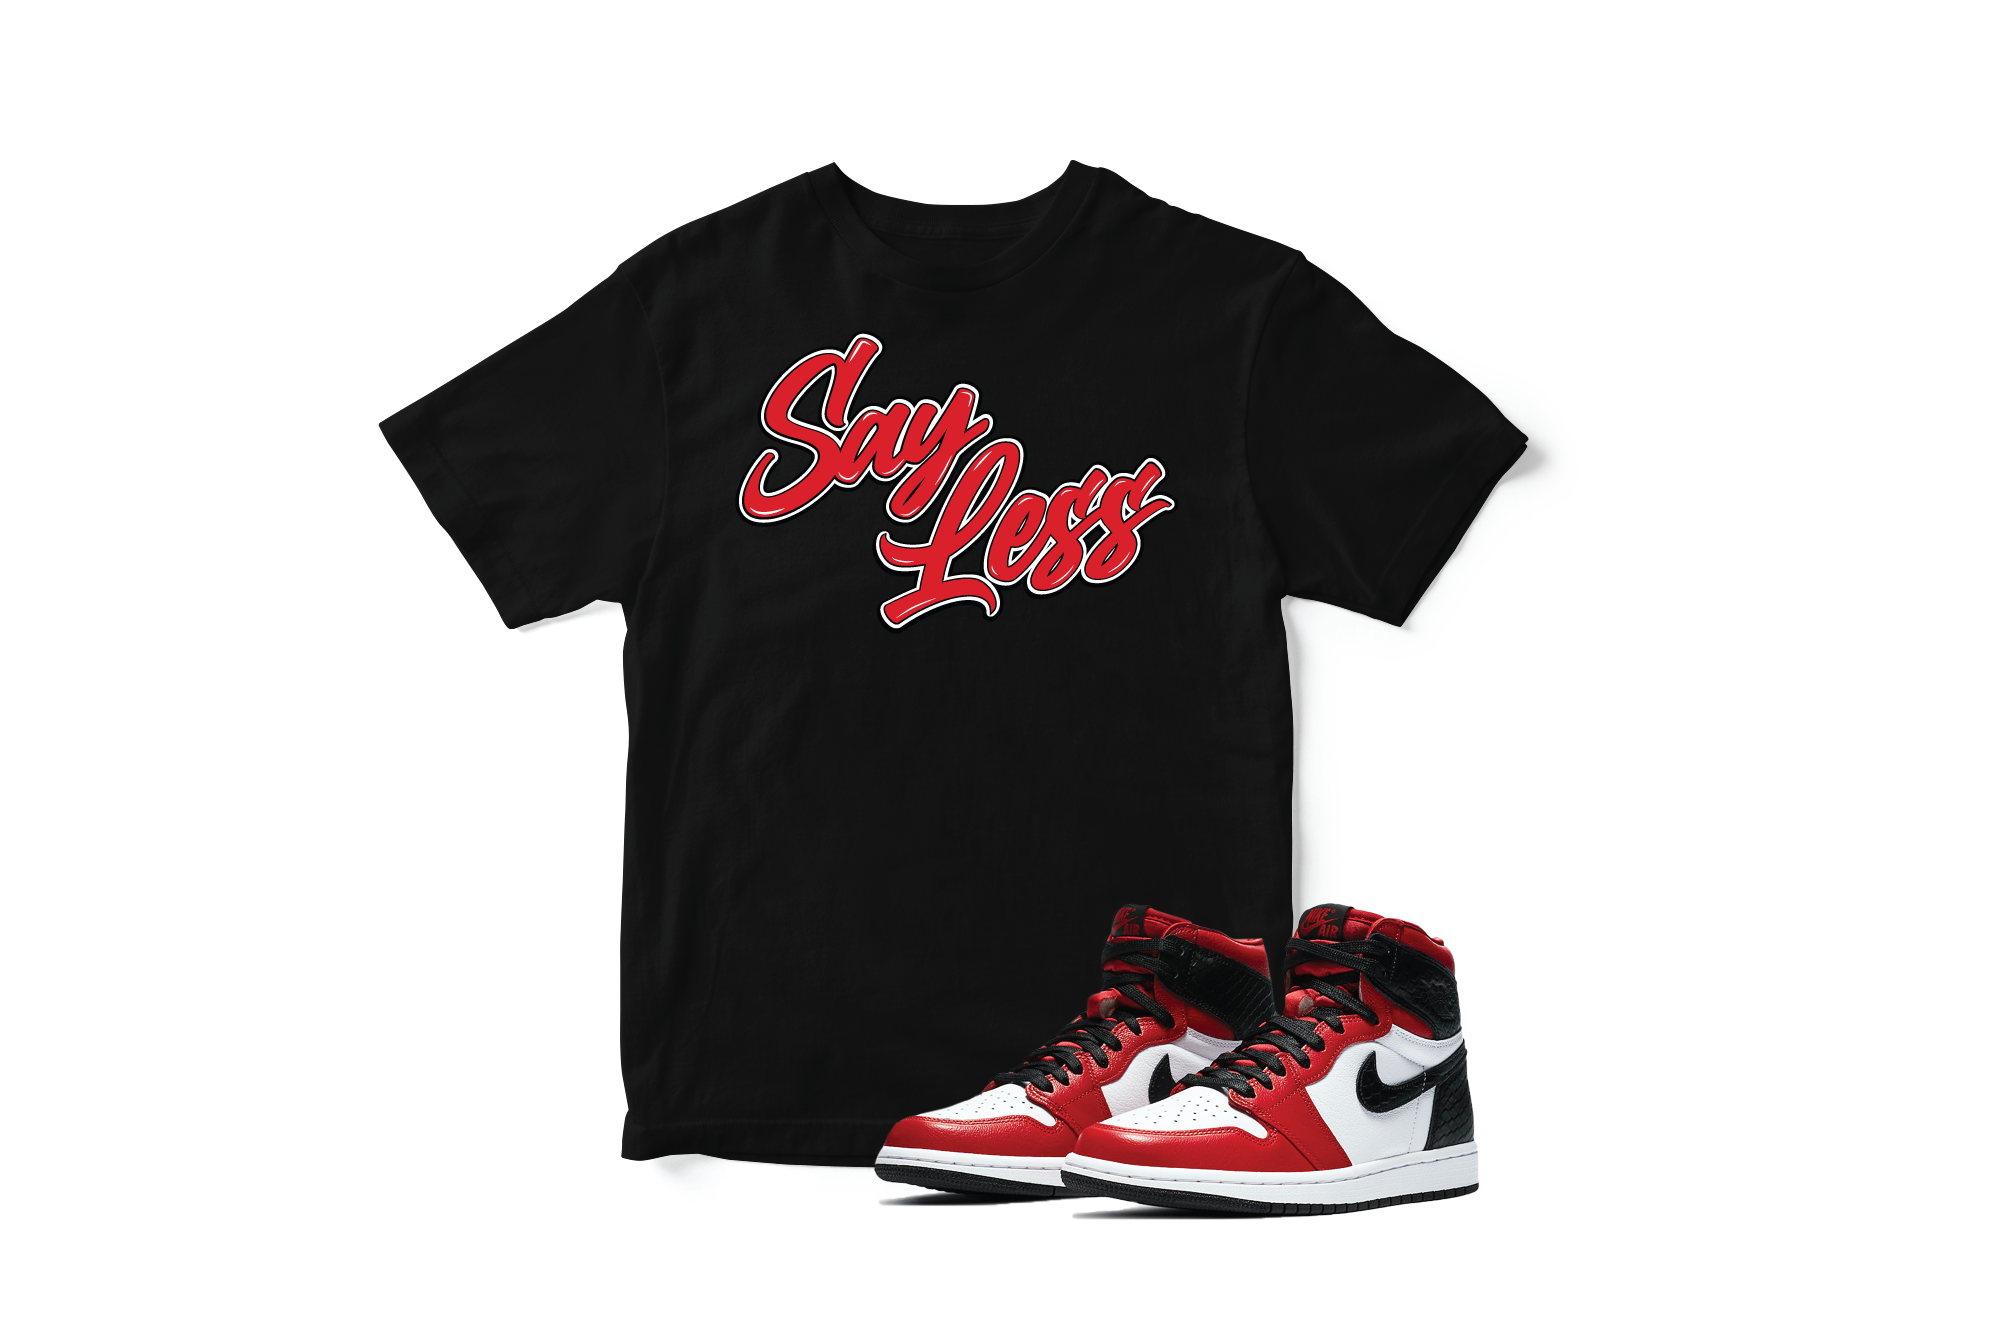 'Say Less' in Satin Snake CW Short Sleeve Tee